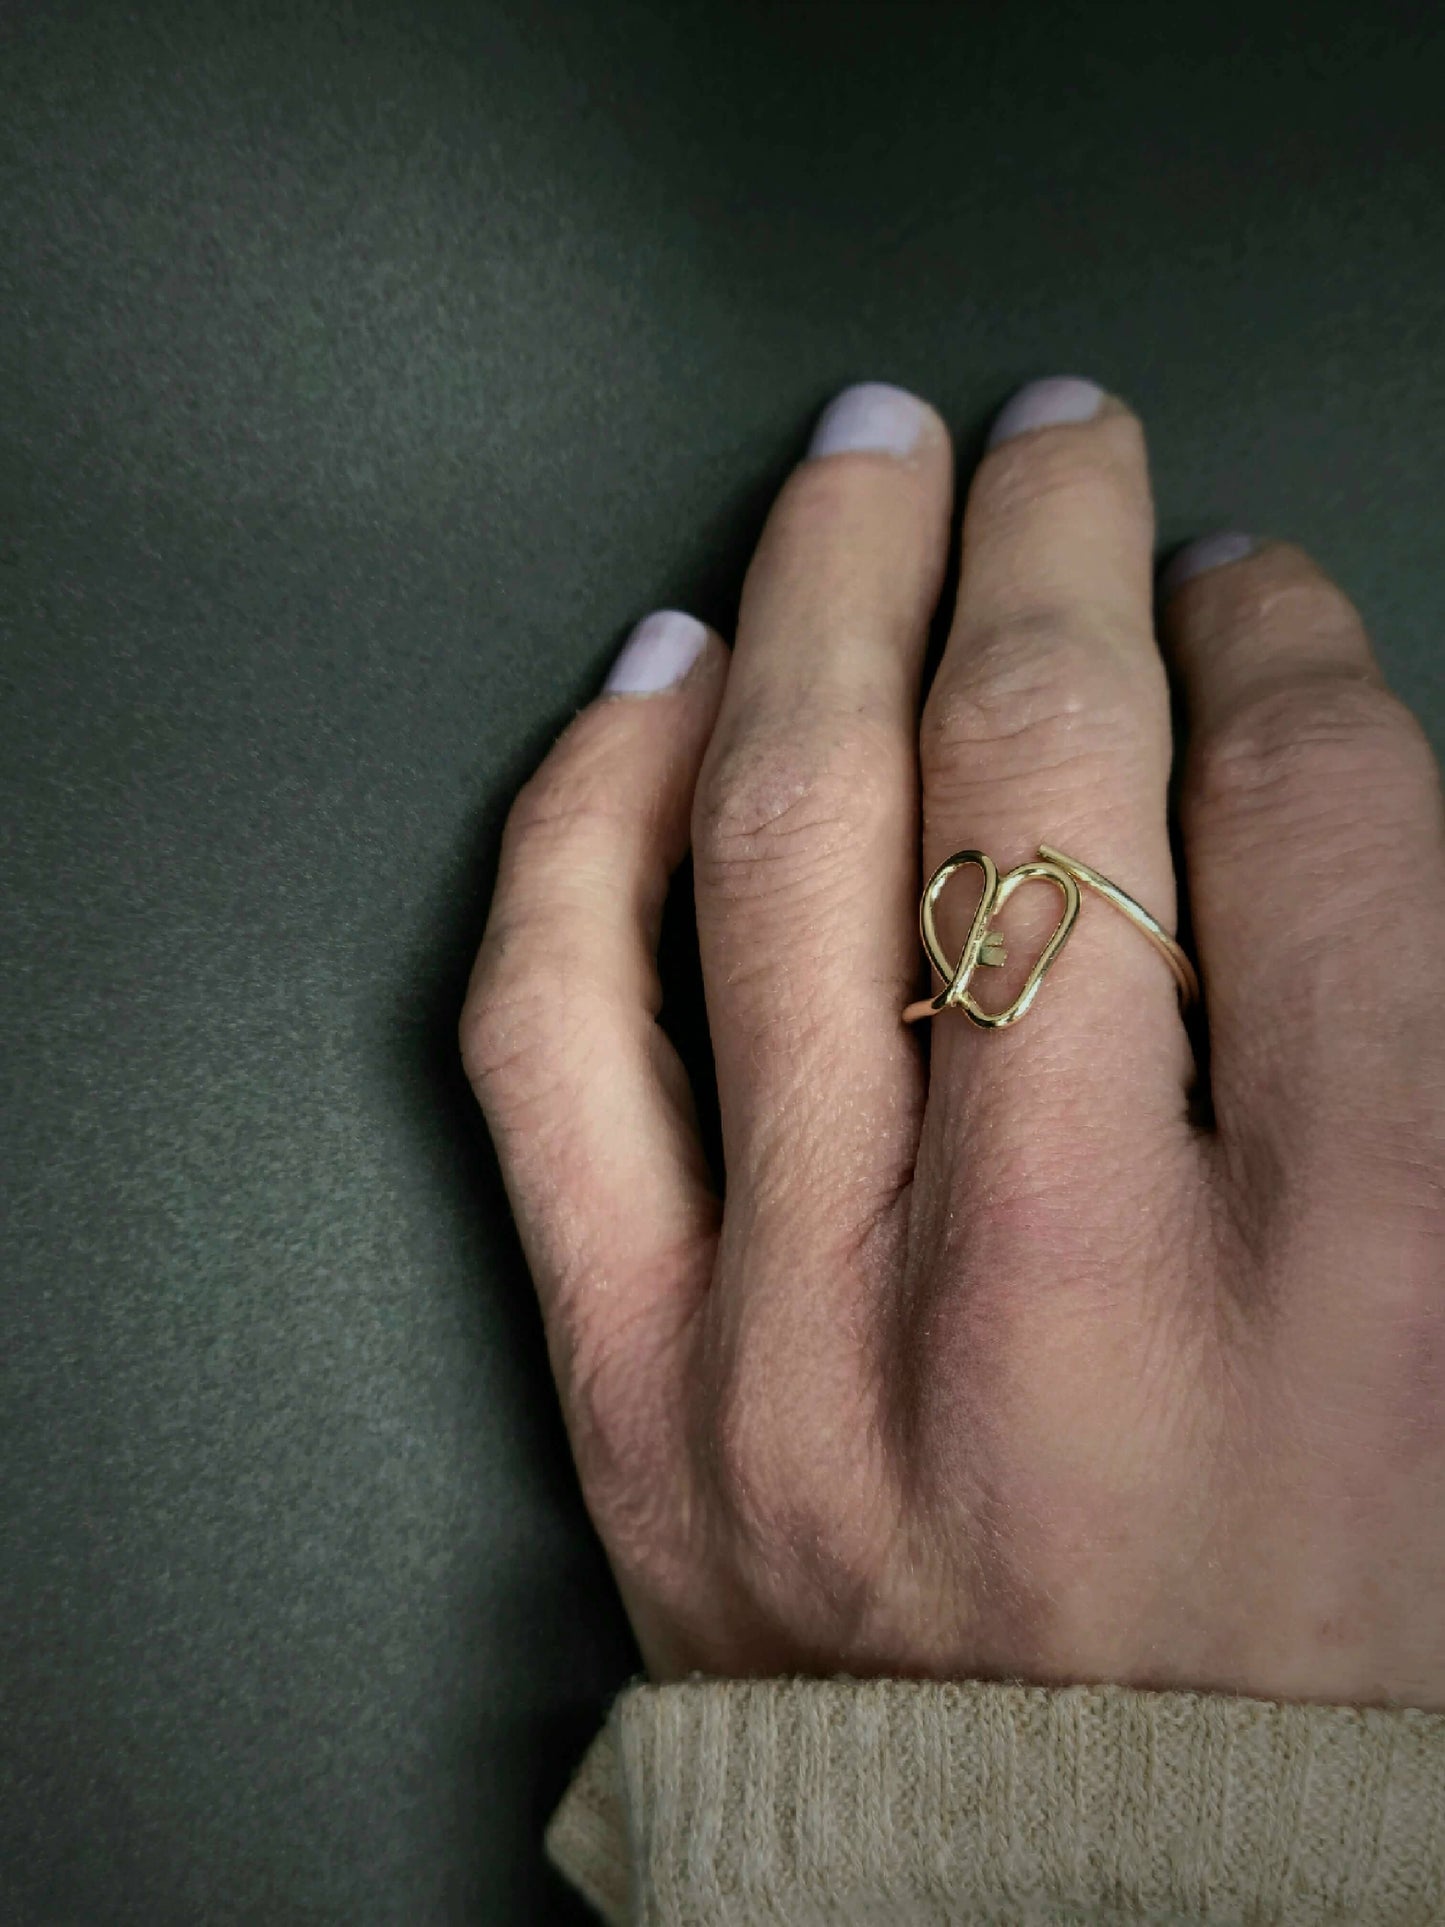 Our gold heart ring reminds you that self-love is the key to your happiness.